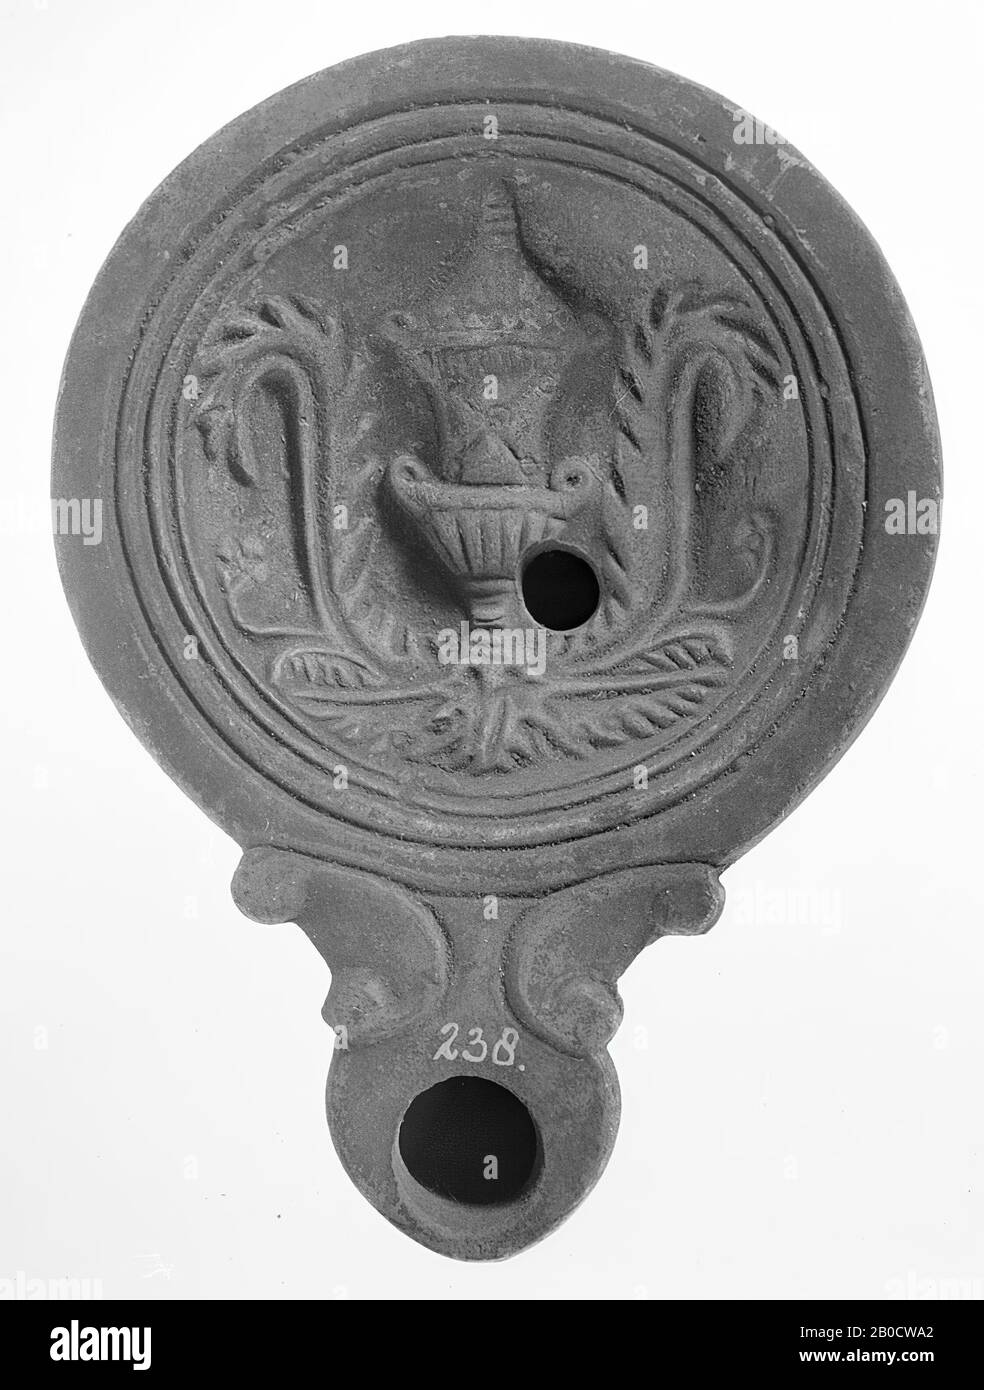 A brownish-cut oil lamp with a round body on a flat base. The hollow mirror is surrounded by recessed concentric circles and is decorated with an image of a burial mound with an acanthus leaf on either side. The short, broad spout with a large fire hole is round closed and decorated with volutes. The small filling hole is located at the bottom right of the figure. Brand: saved in shape of hares, oil lamp, earthenware, terracotta, 3.1 x 11.8 x 8.7 cm, 1st and 2nd century AD. 1-200 AD, Tunisia Stock Photo